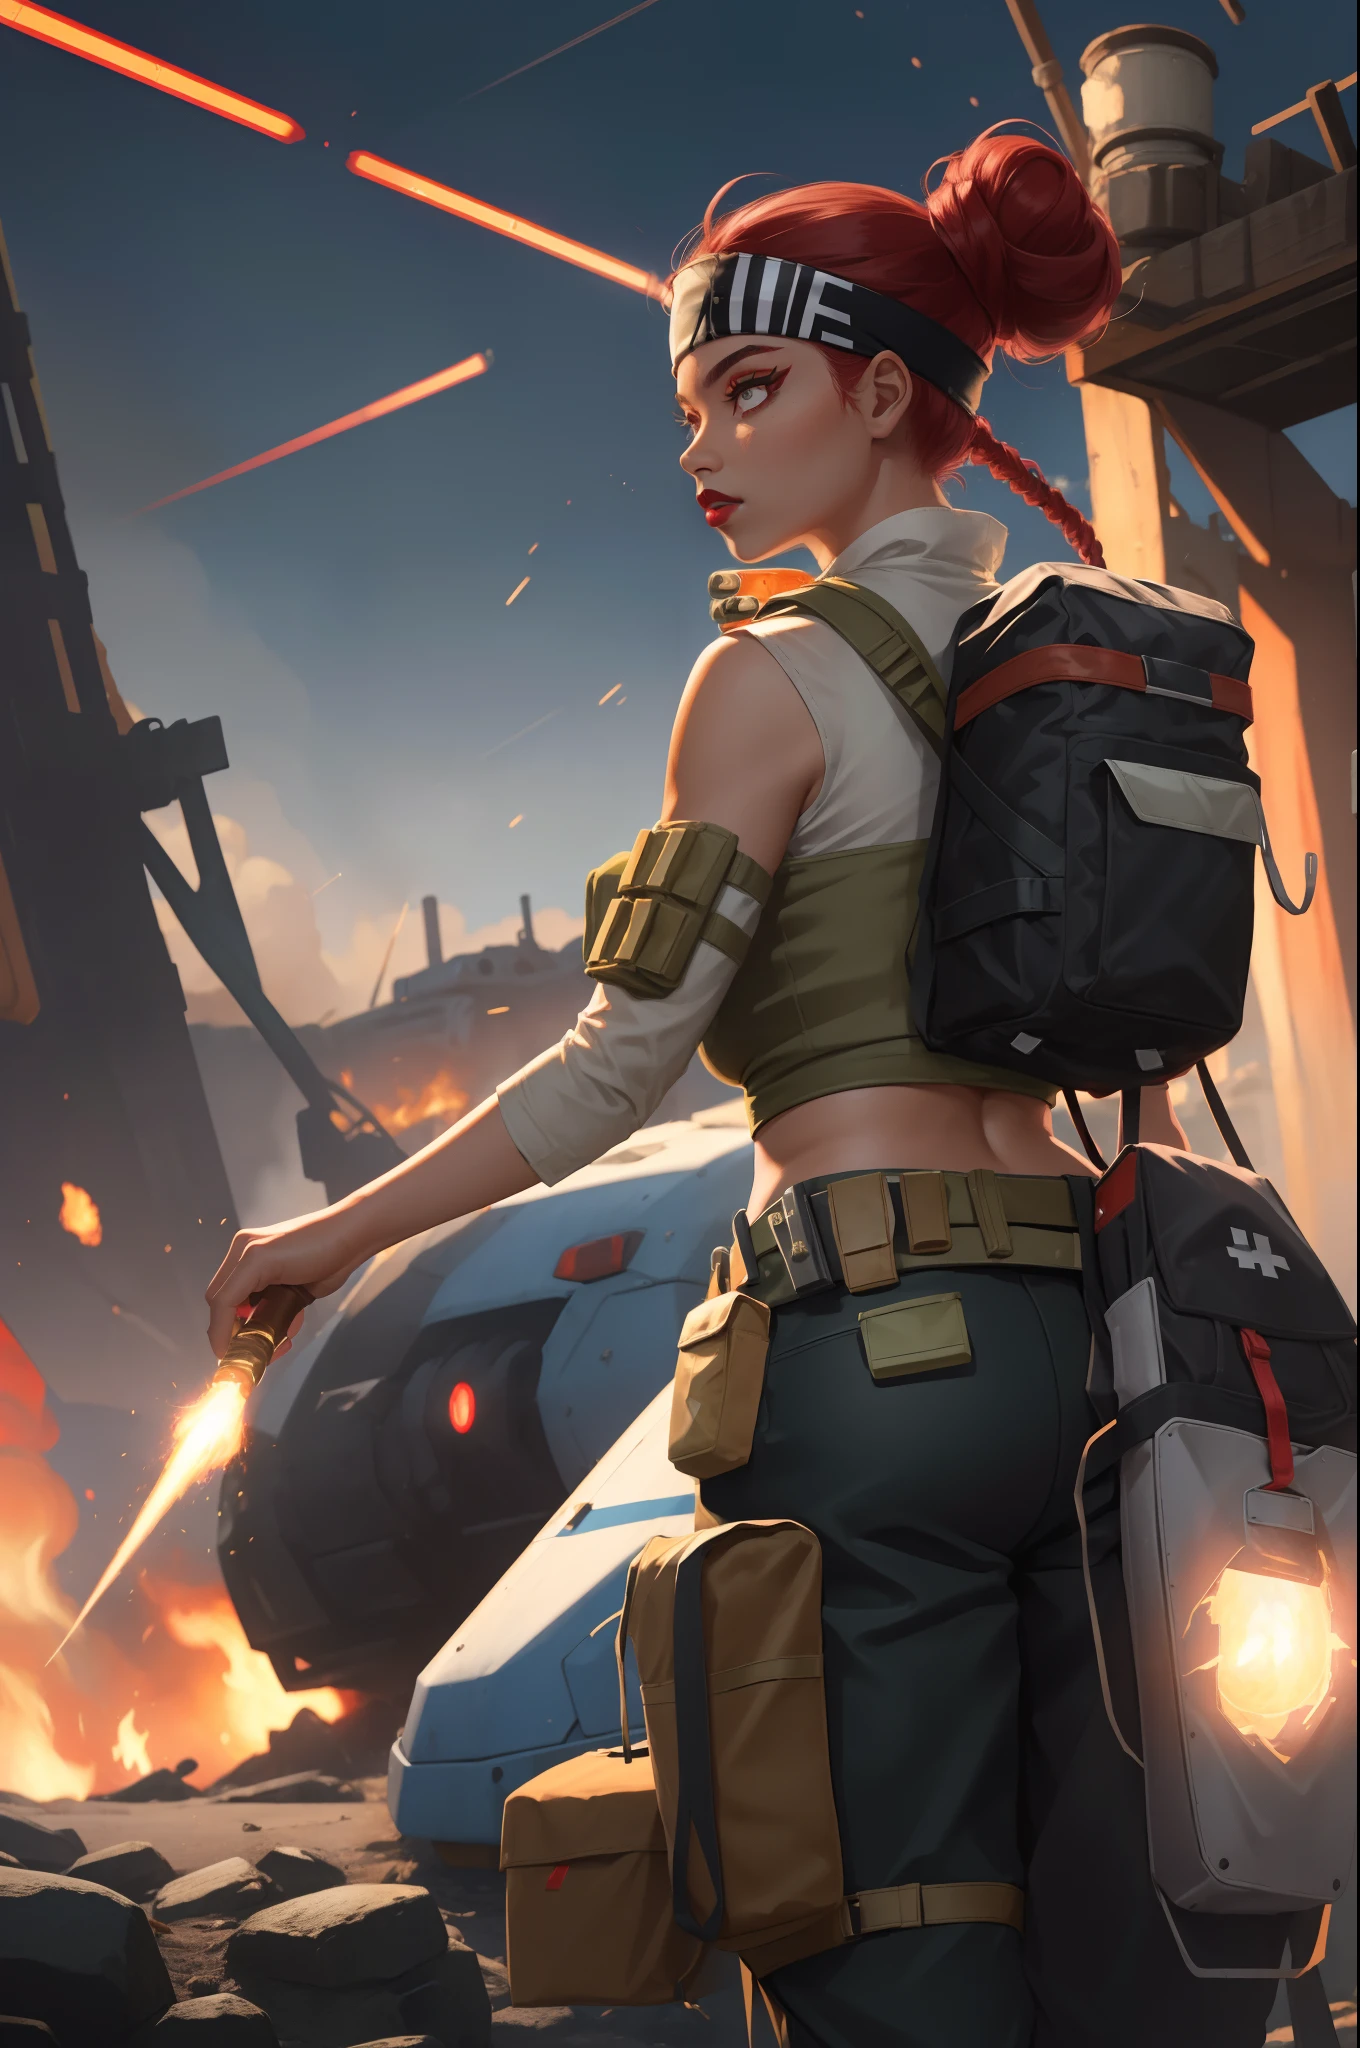 (masterpiece:1.4), (best quality:1.2), 1girl, lifeline (apex legends), dark-skinned female, intense gaze, detailed eyes, beautiful detailed lips, vibrant red lipstick, long eyelashes, confident expression, black headband with medical cross symbol, loose hair bun, red hair cascading down her back, fitted black crop top, short detached sleeves, black pants, utility belt with pockets, combat boots, mask around neck, intricate patterns on mask, red and white color scheme, glowing red energy lines surrounding her body, intense battlefield backdrop, sparks flying in the air, dynamic pose